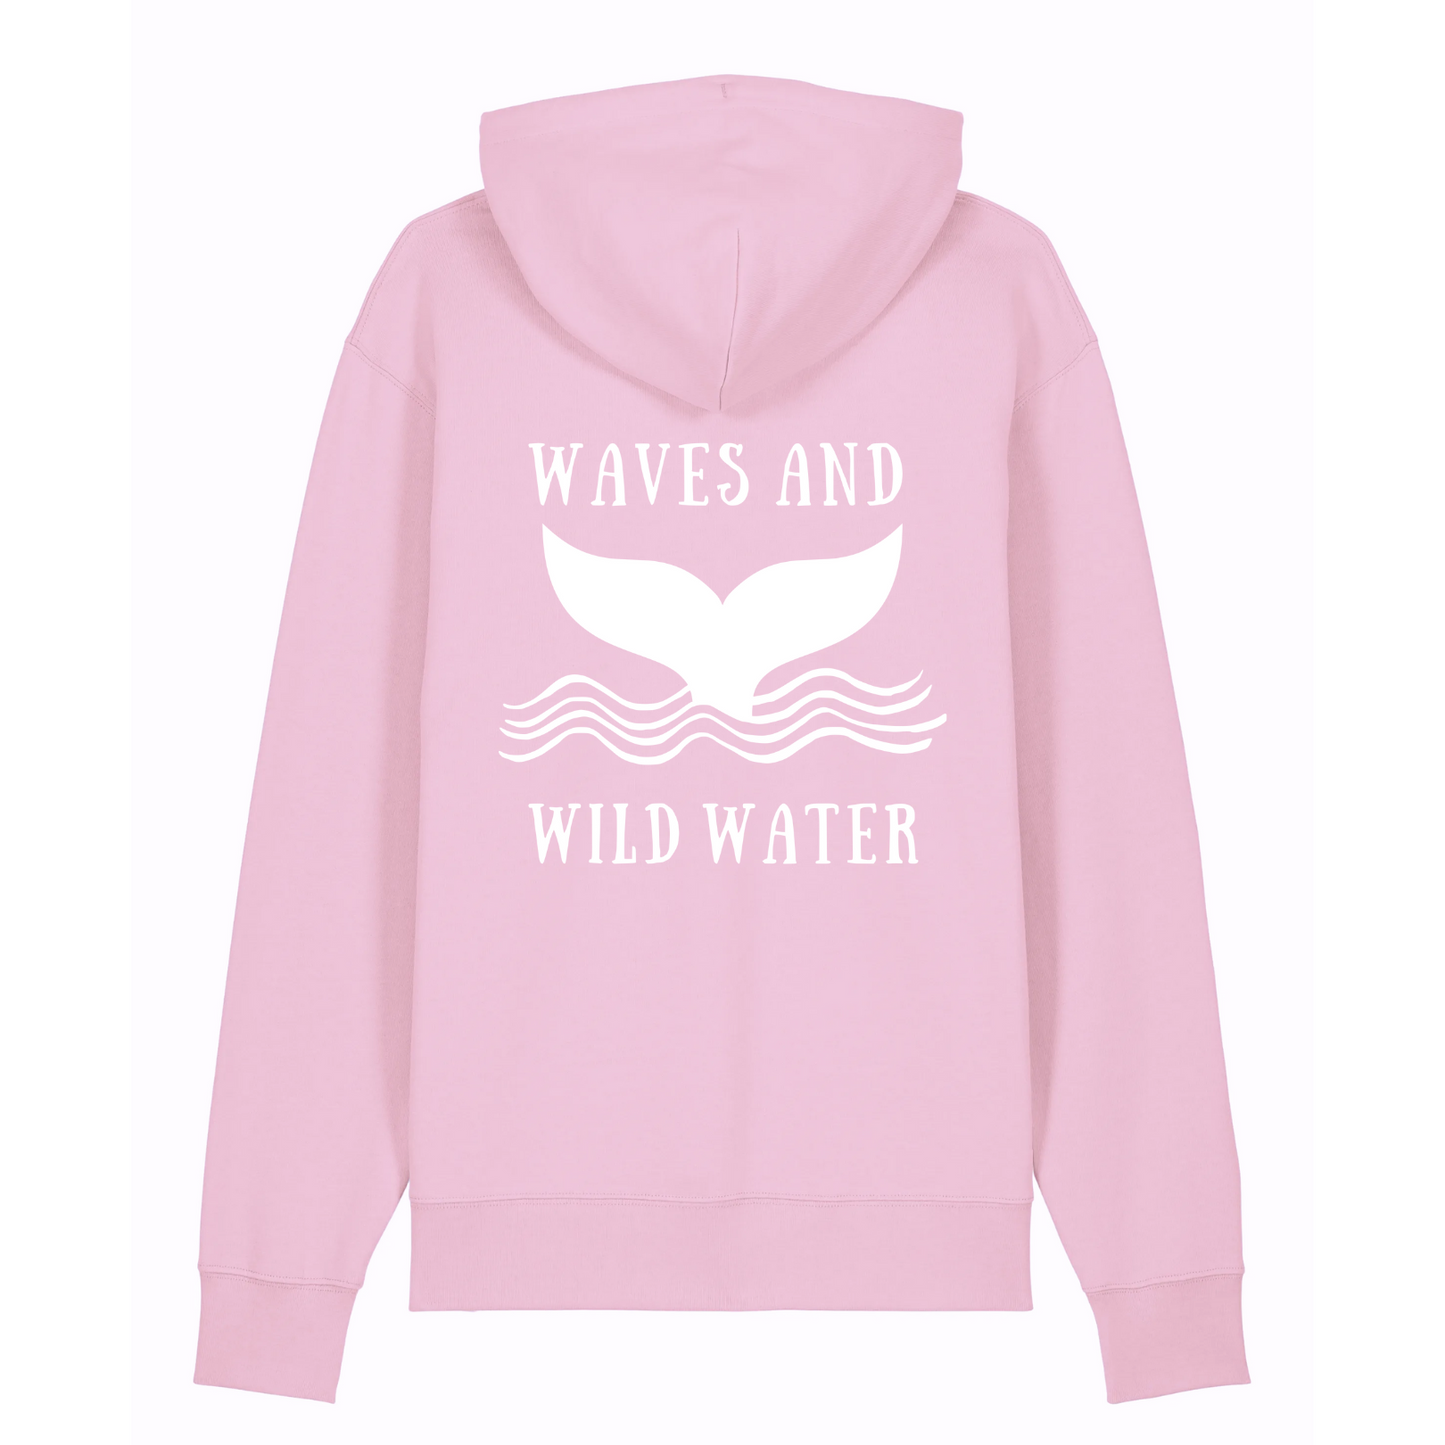 At Waves and Wild Water we all love this pink organic cotton and recycled polyester hoodie from our Beach Hut Hoodies collection. The image shows the back of the hoodie with a large Waves and Wild Water logo depicting a whale tail emerging from the waves hand printed in white vegan ink. We think it is perfect if you love water adventures too.